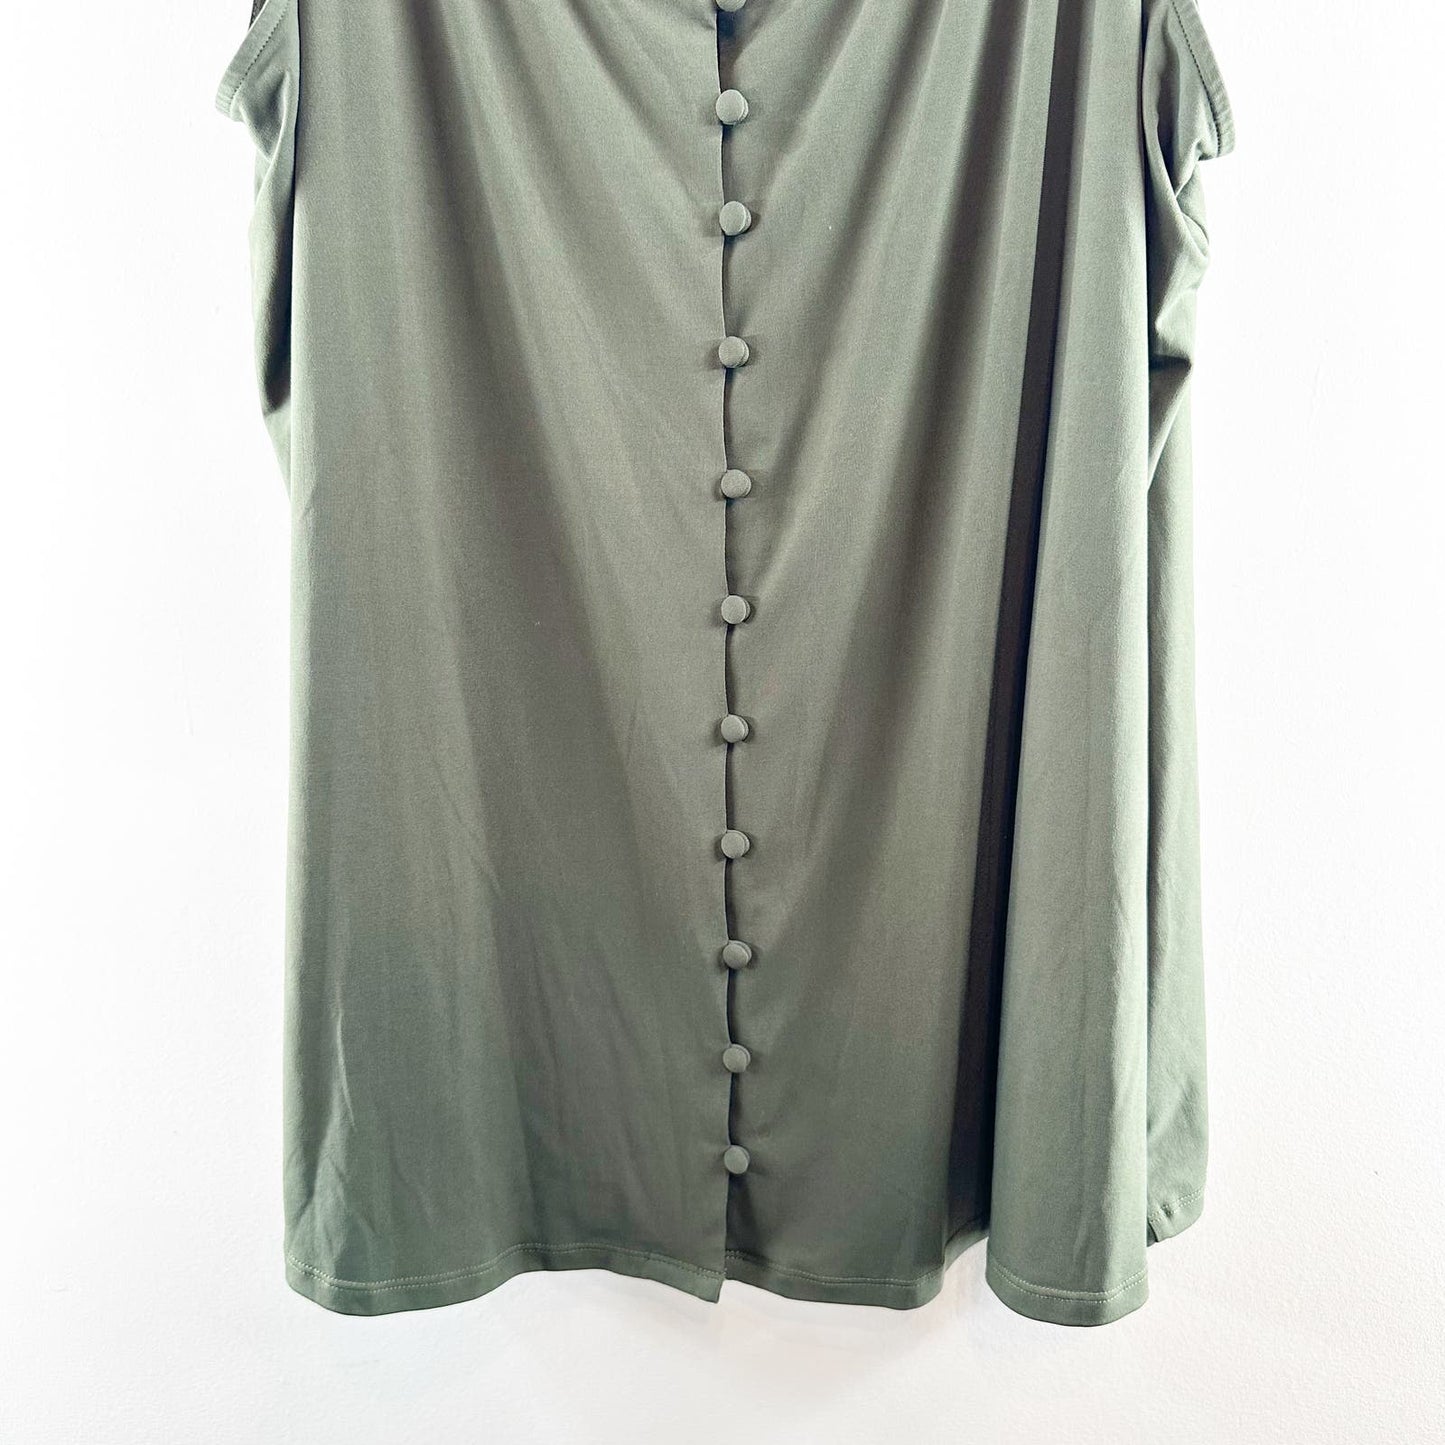 Torrid Button Up Lace Trim Cami Tank Top Olive Green 5X